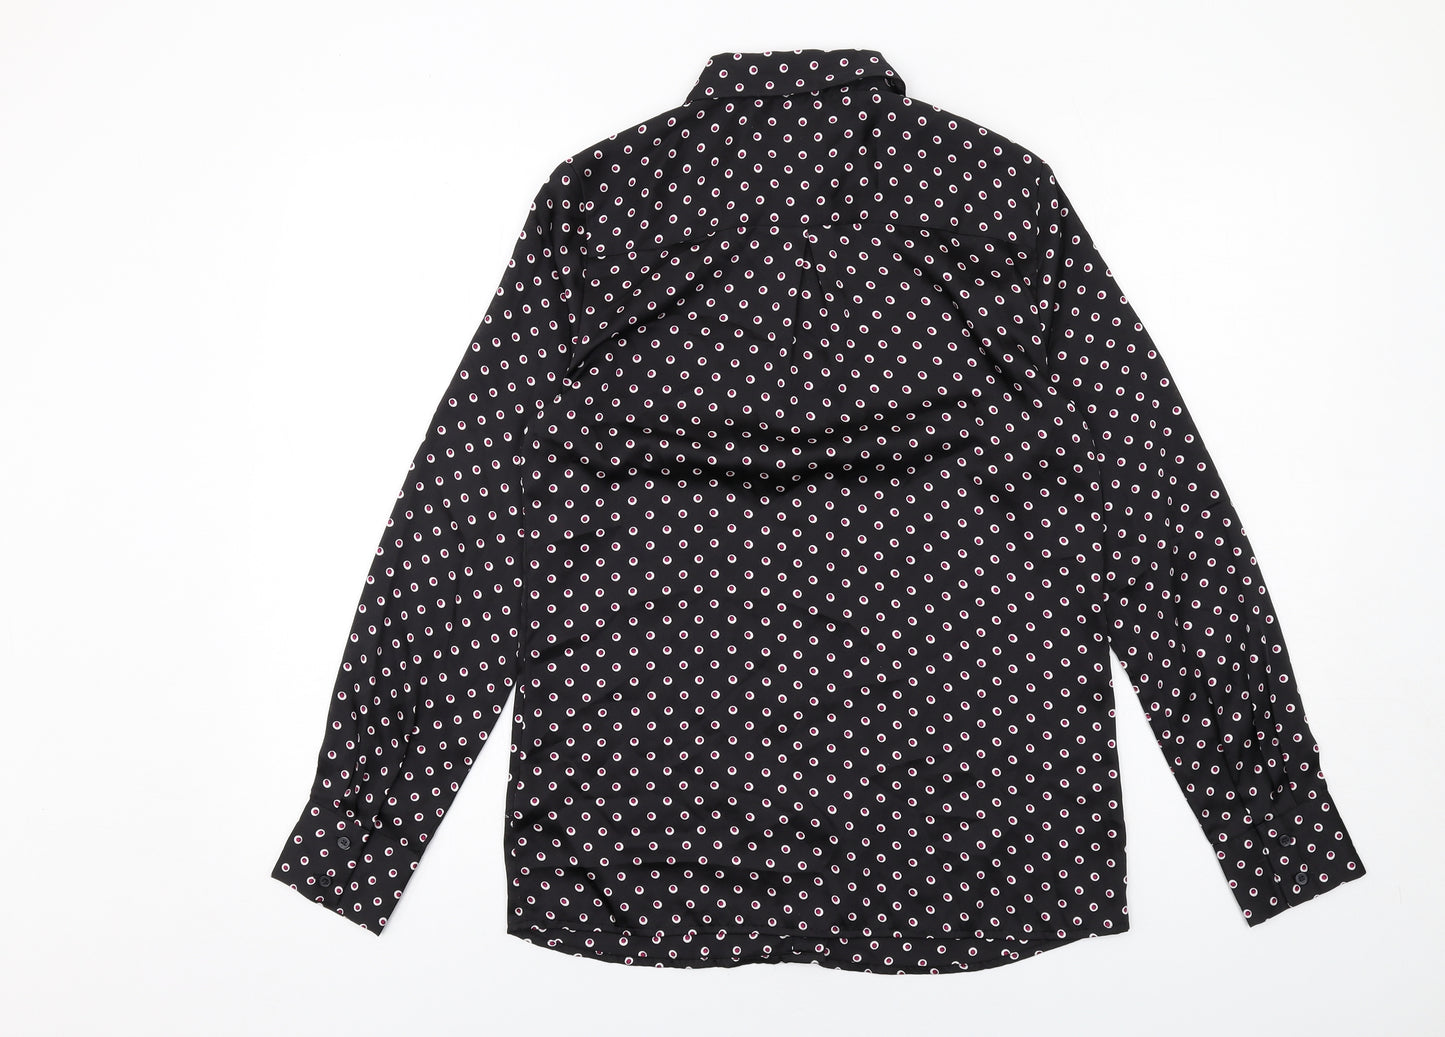 Classics Womens Black Geometric Polyester Basic Button-Up Size 8 Collared